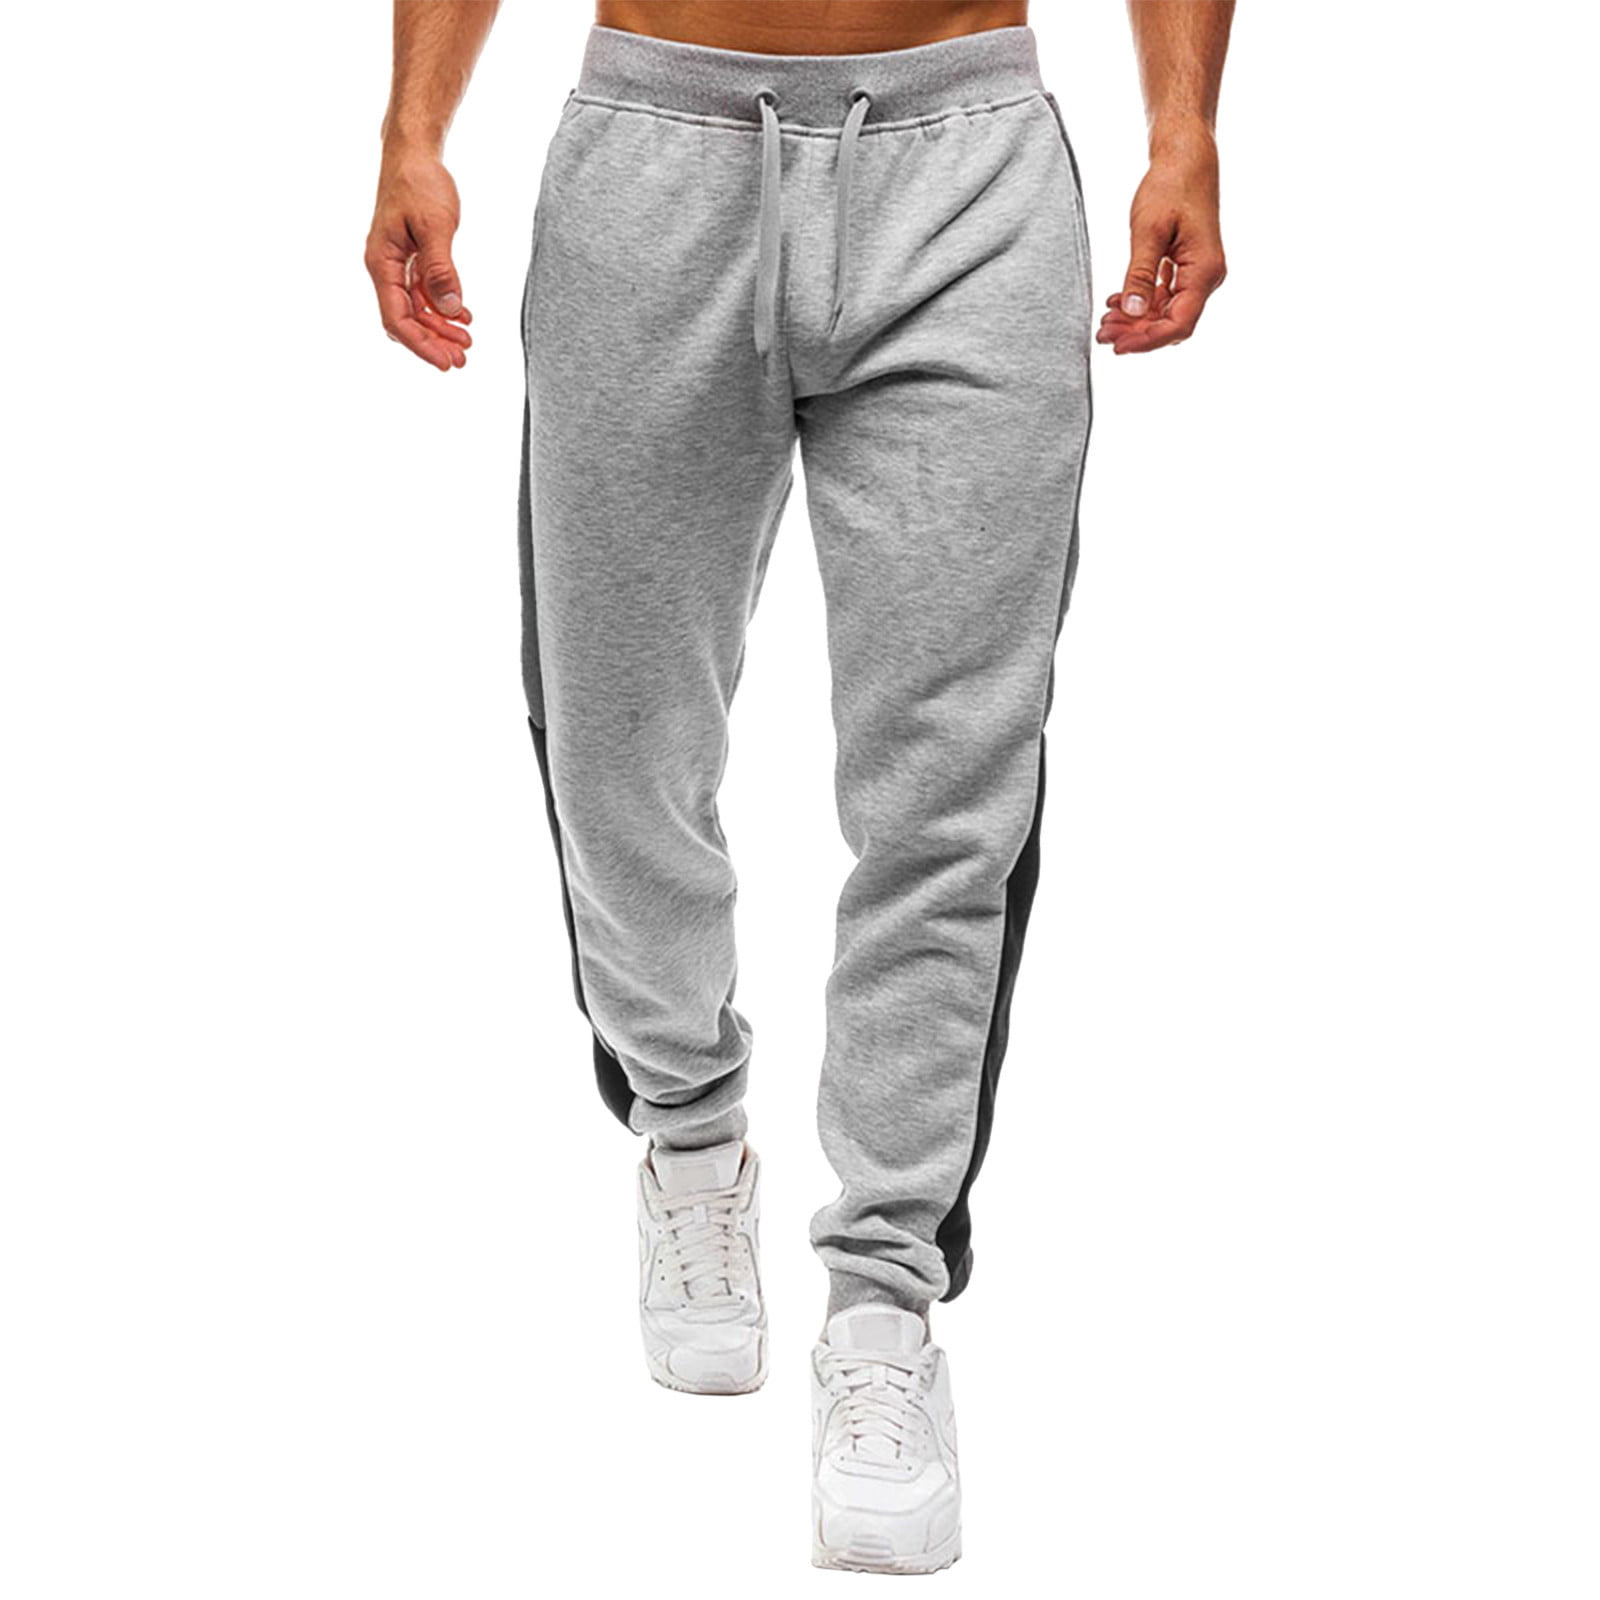 BHSJ Men Splicing Printed Overalls Casual Workout Pants Pocket Sport Pants Daily Solid Drawstring Trousers Sweatpants 